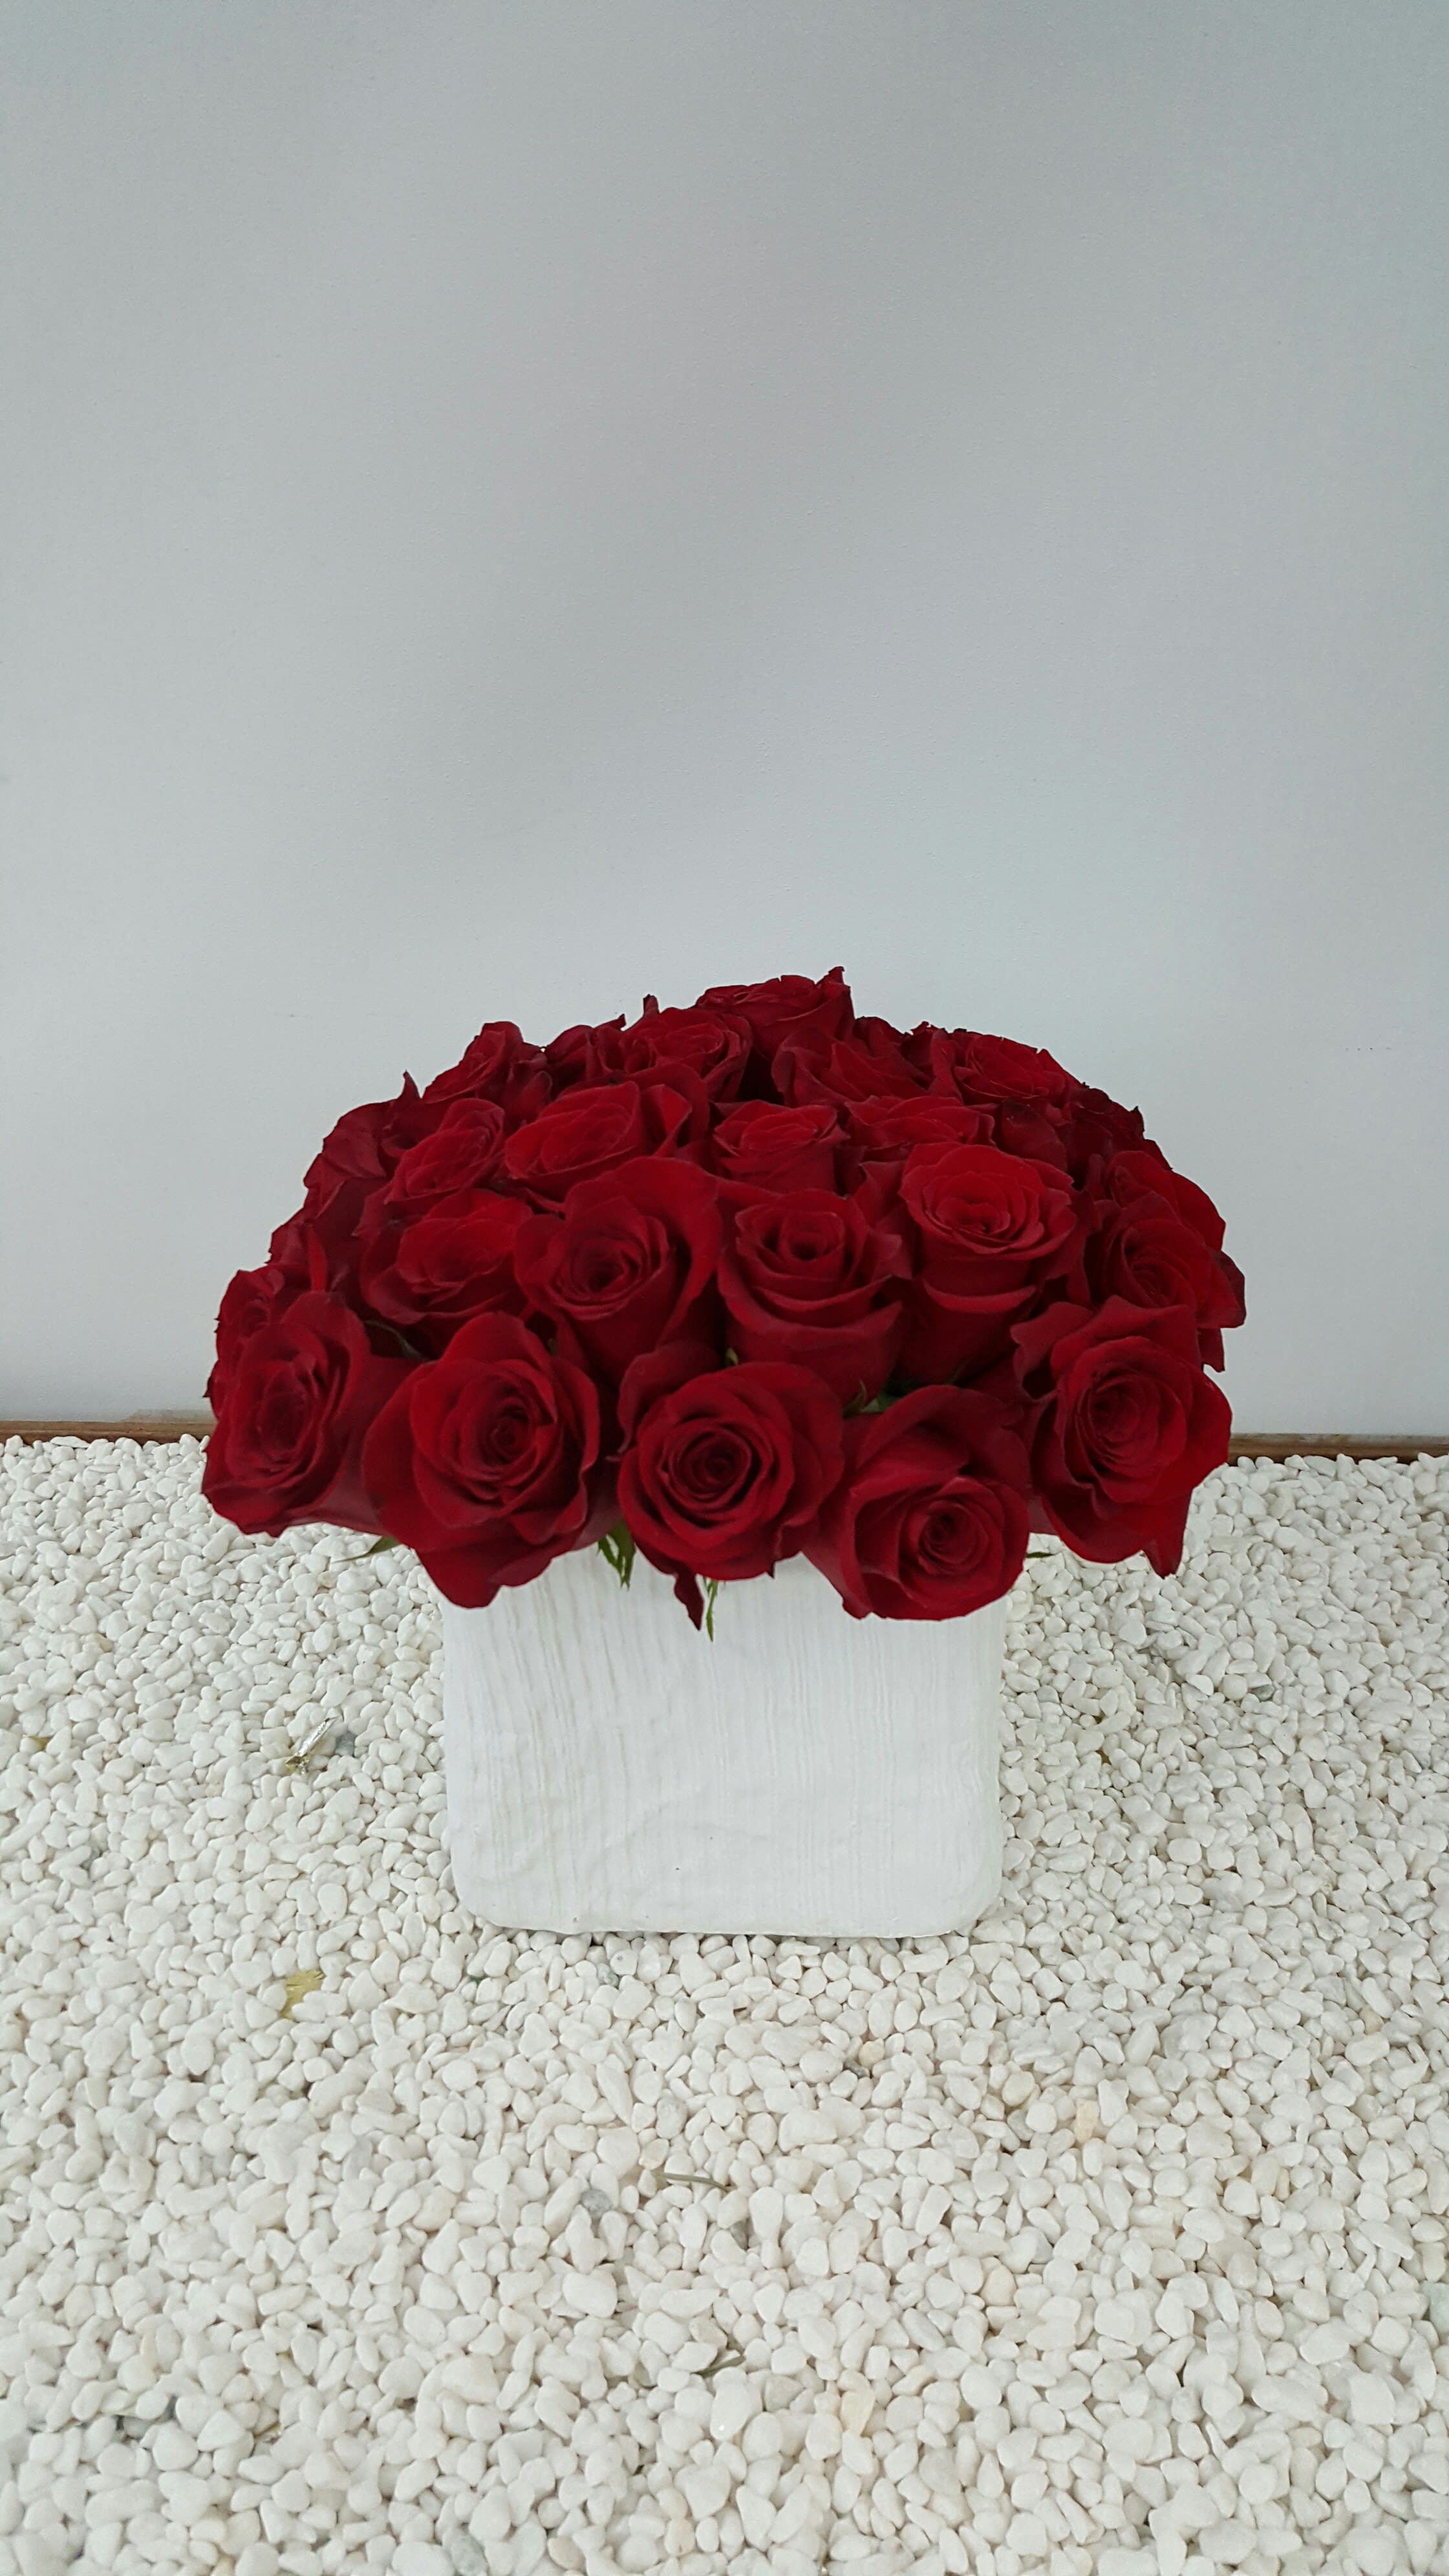 Cluster of Red Roses